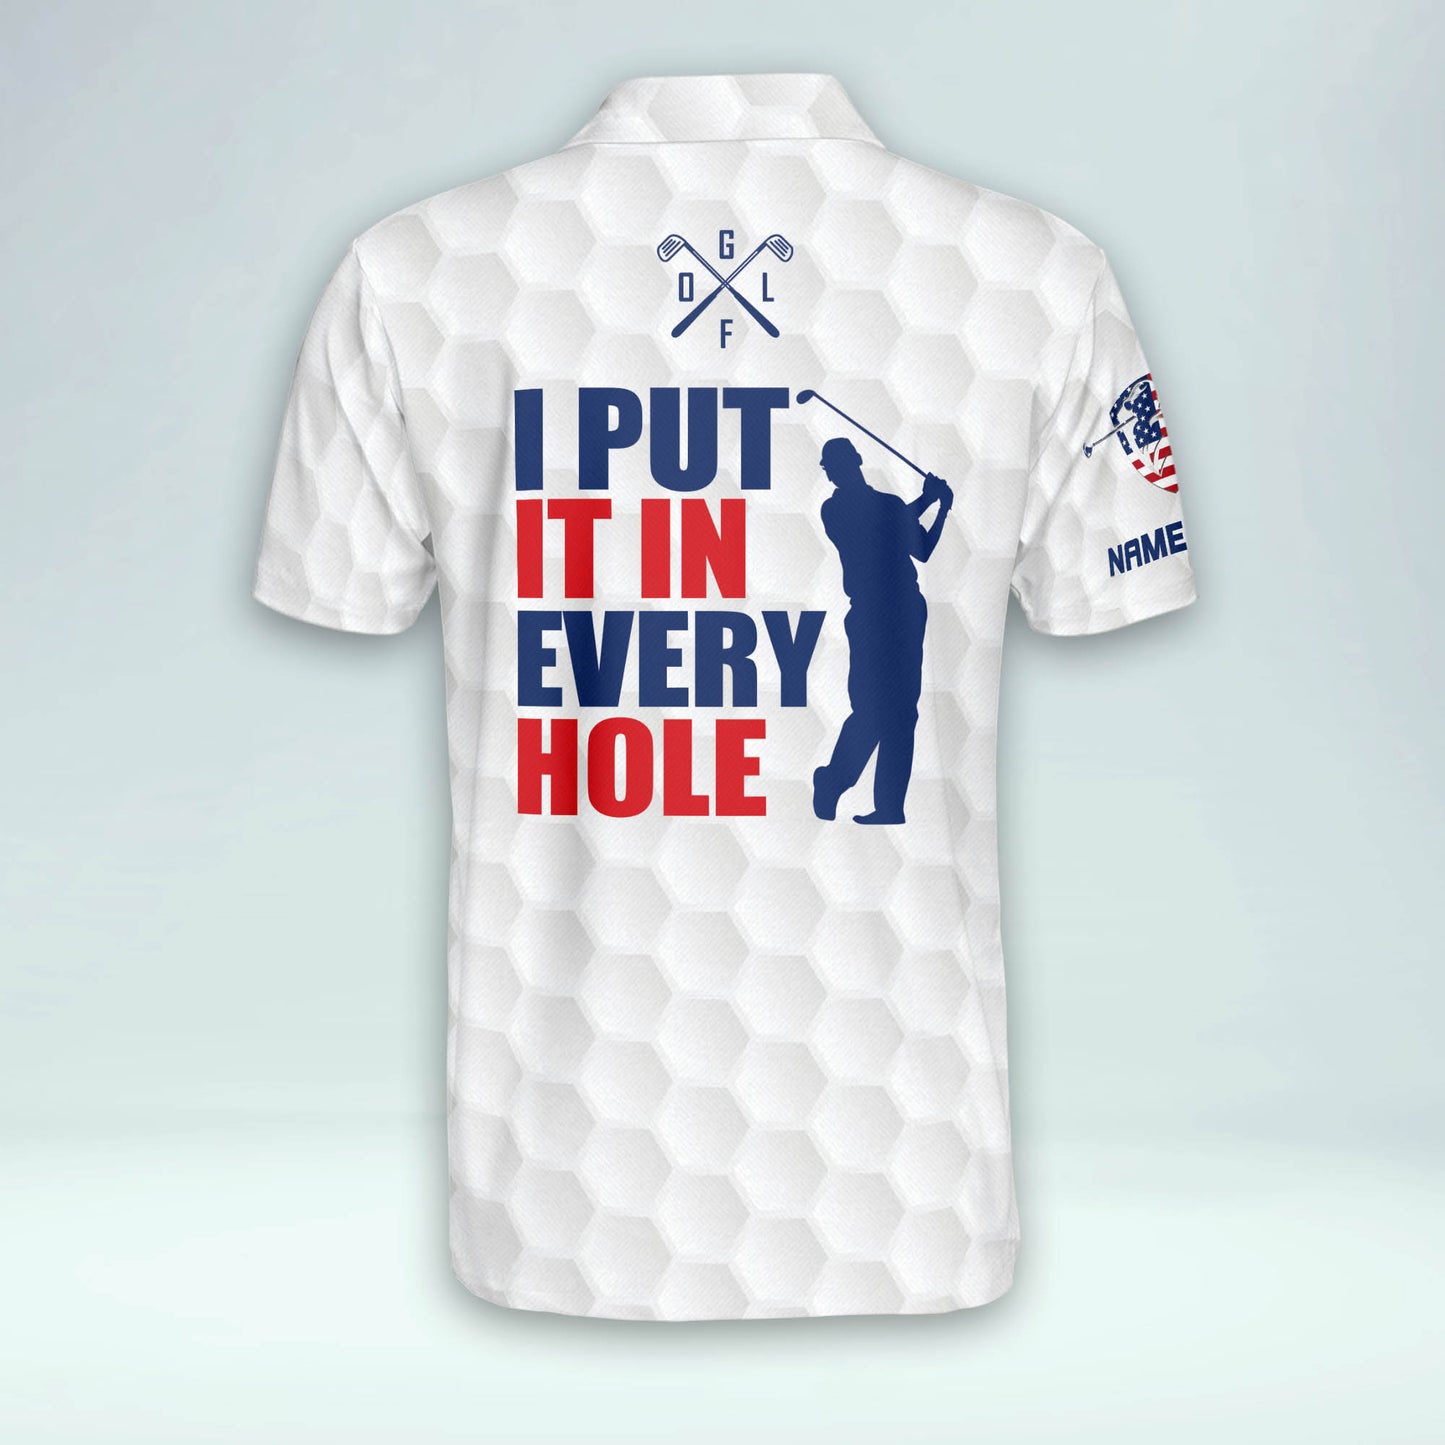 I Put It in Every Hole Golf Polo Shirt GM0362